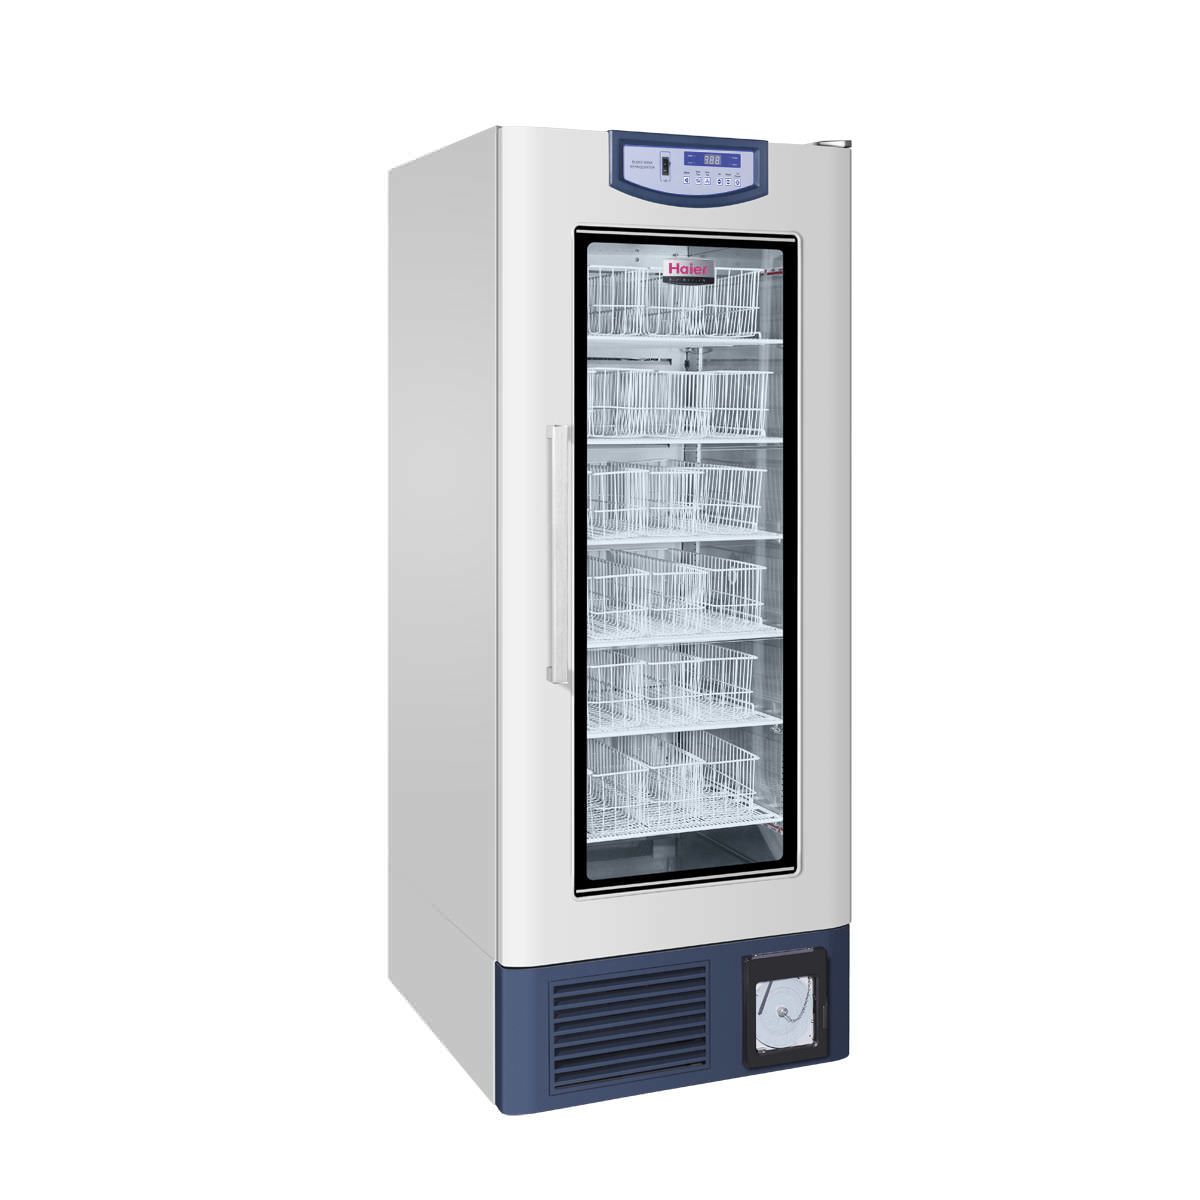 Refrigerator 4 °C , 608 L | HXC-608 Haier Medical and Laboratory Products